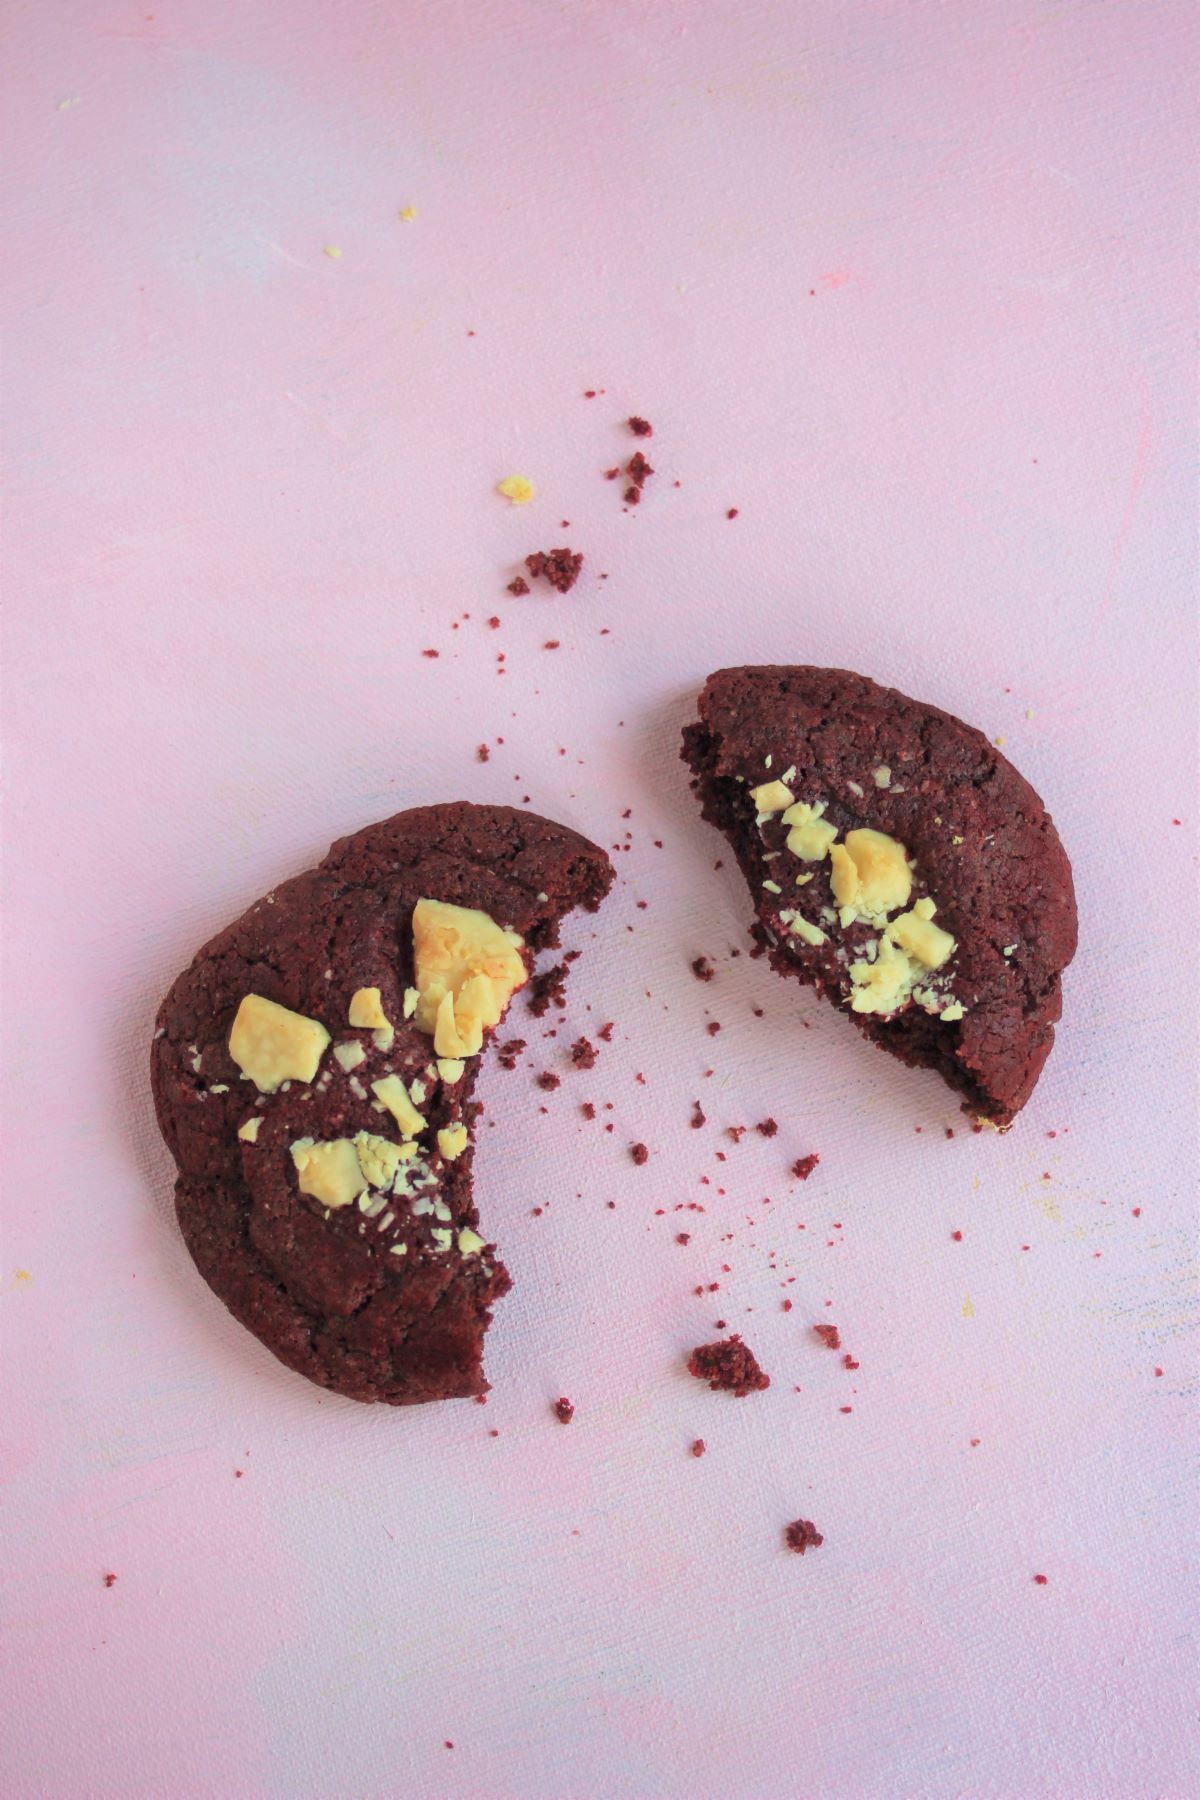 Red velvet cookie with white chocolate chunks, cut in half on a pink surface.